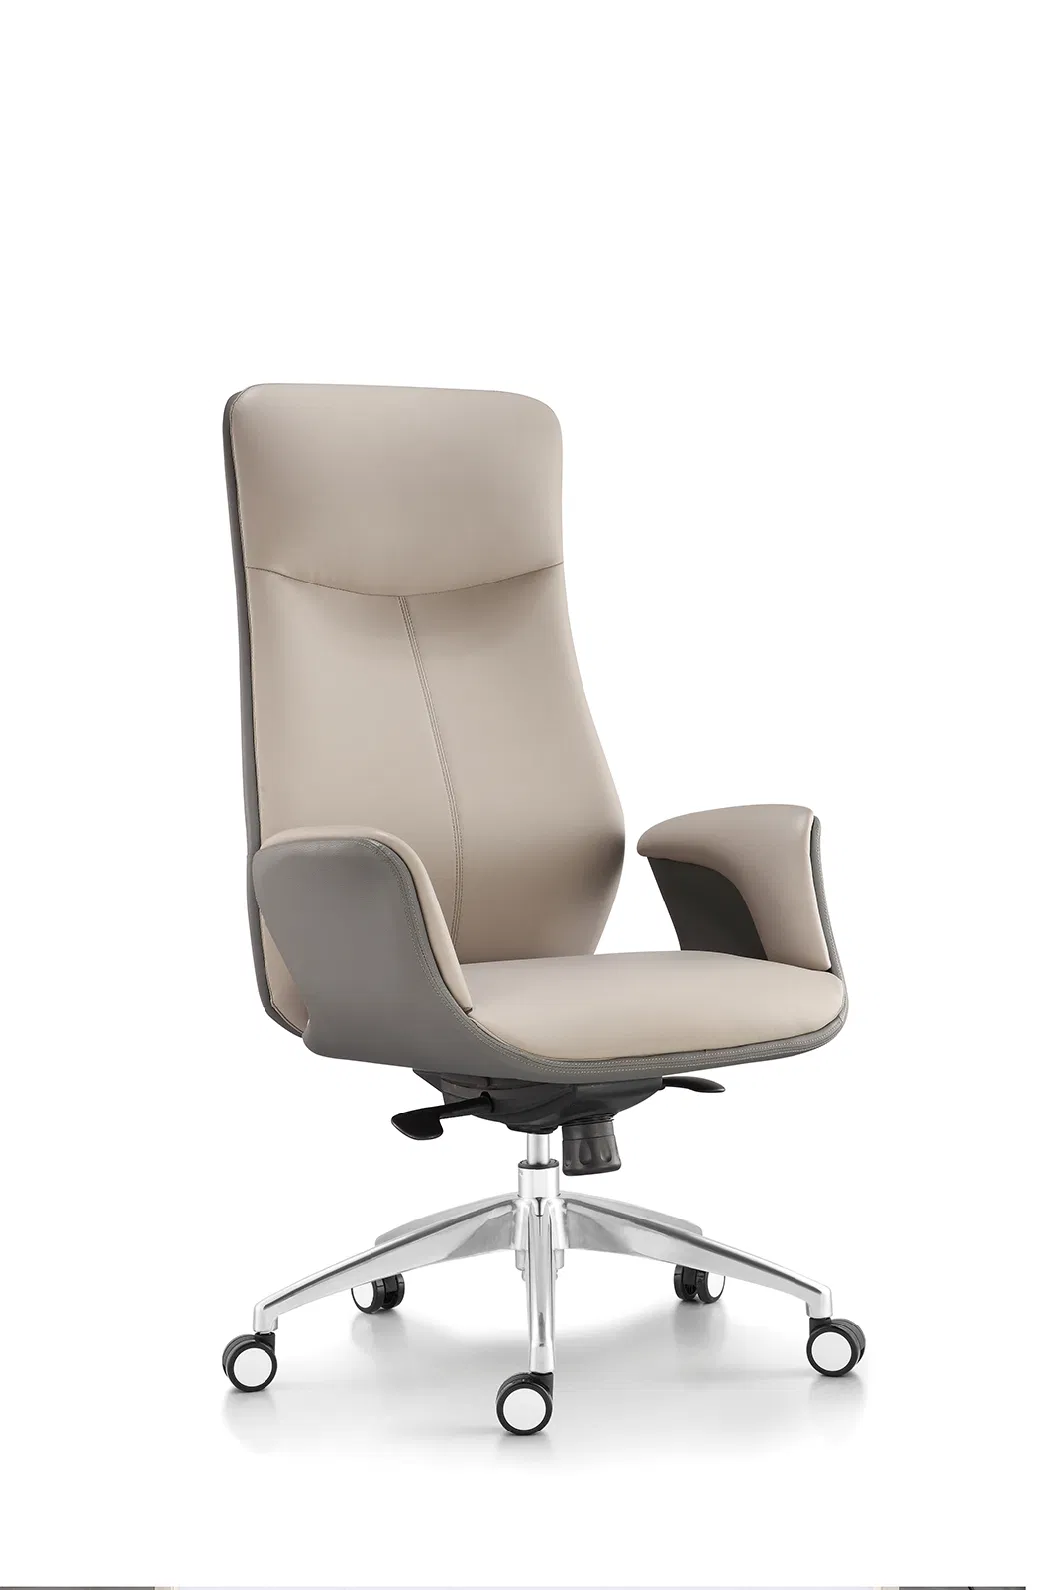 Modern Workspace Office Furniture High Back PU Leather Armchair Swivel Executive Chair Direct Factory with Wholesale Price